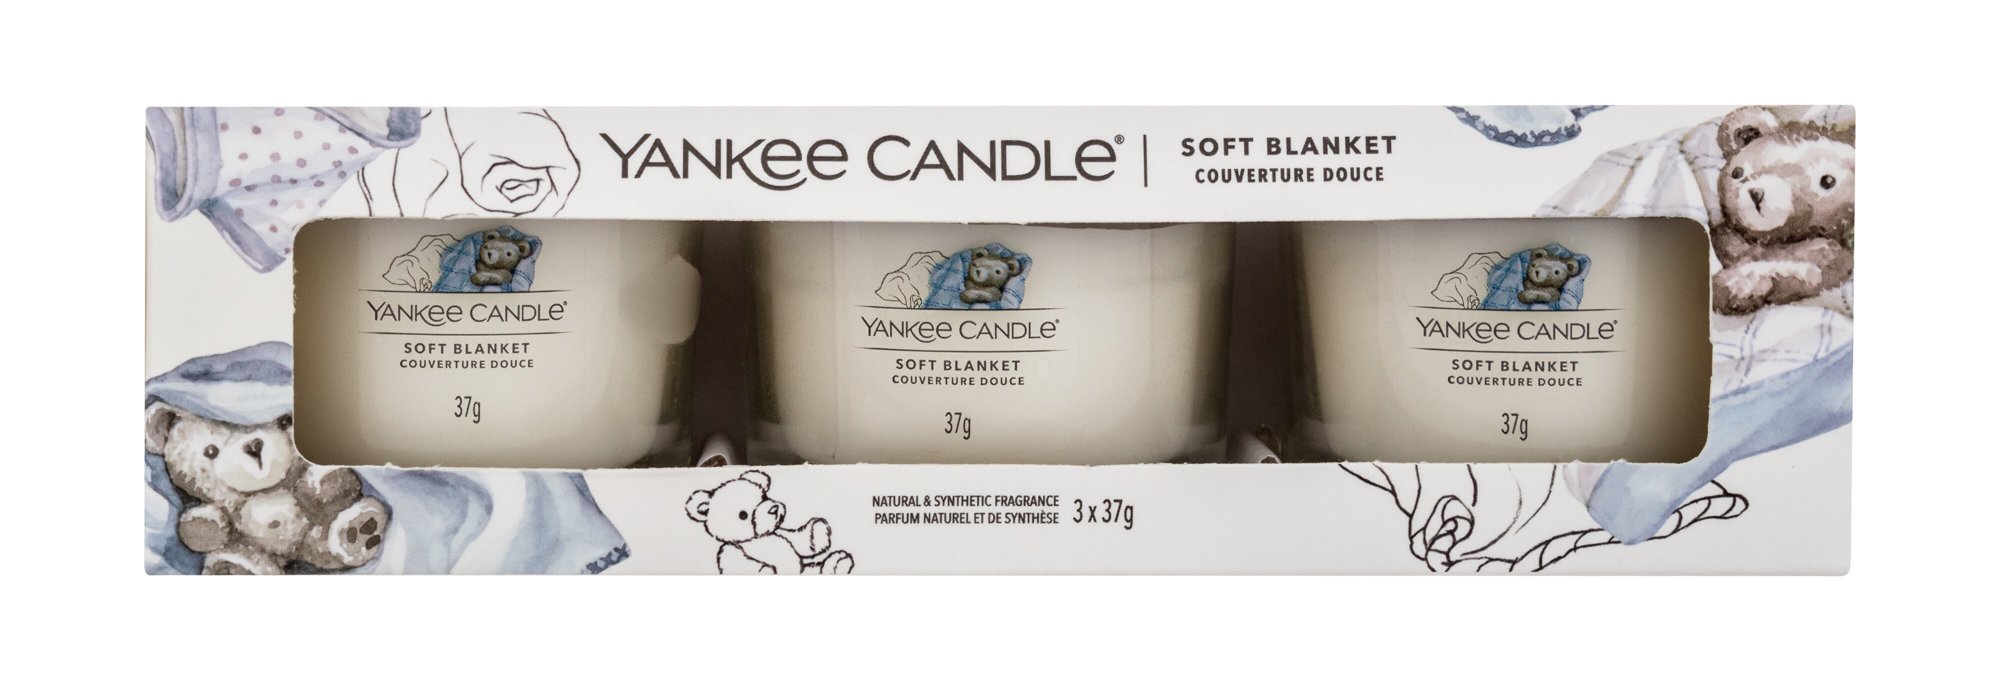 Yankee Candle Soft Blanket 37g Scented Candle 3 x 37 g Kvepalai Unisex Scented Candle Rinkinys